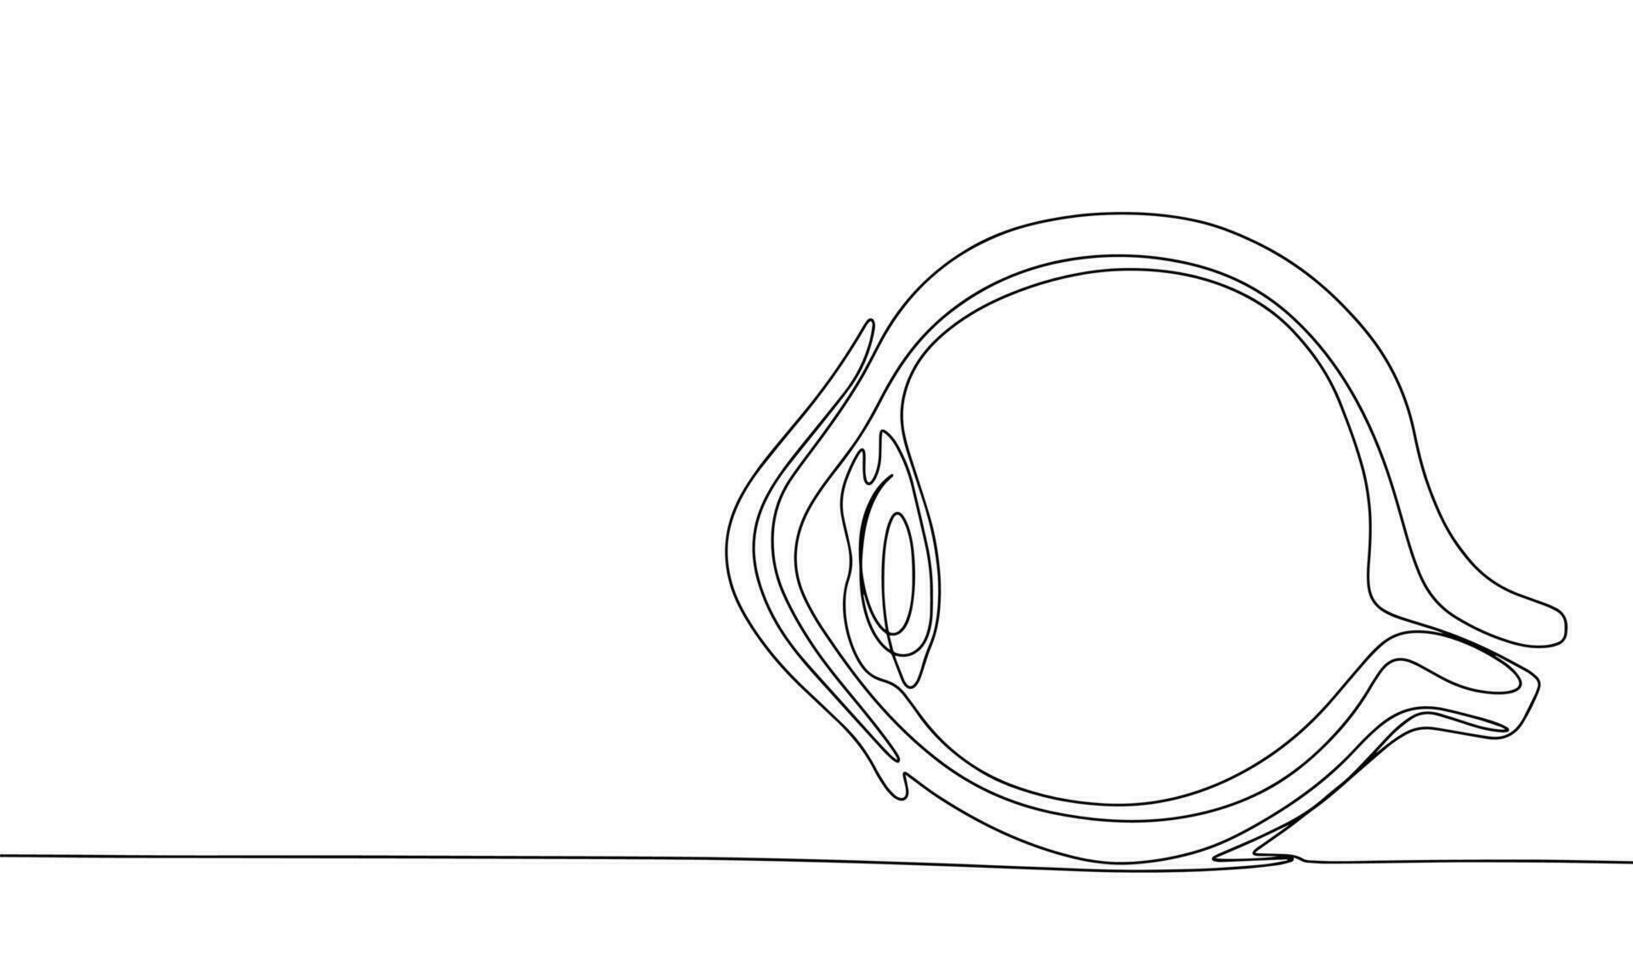 One line continuous eye anatomy. Line art health banner concept. Hand drawn, outline vector illustration.